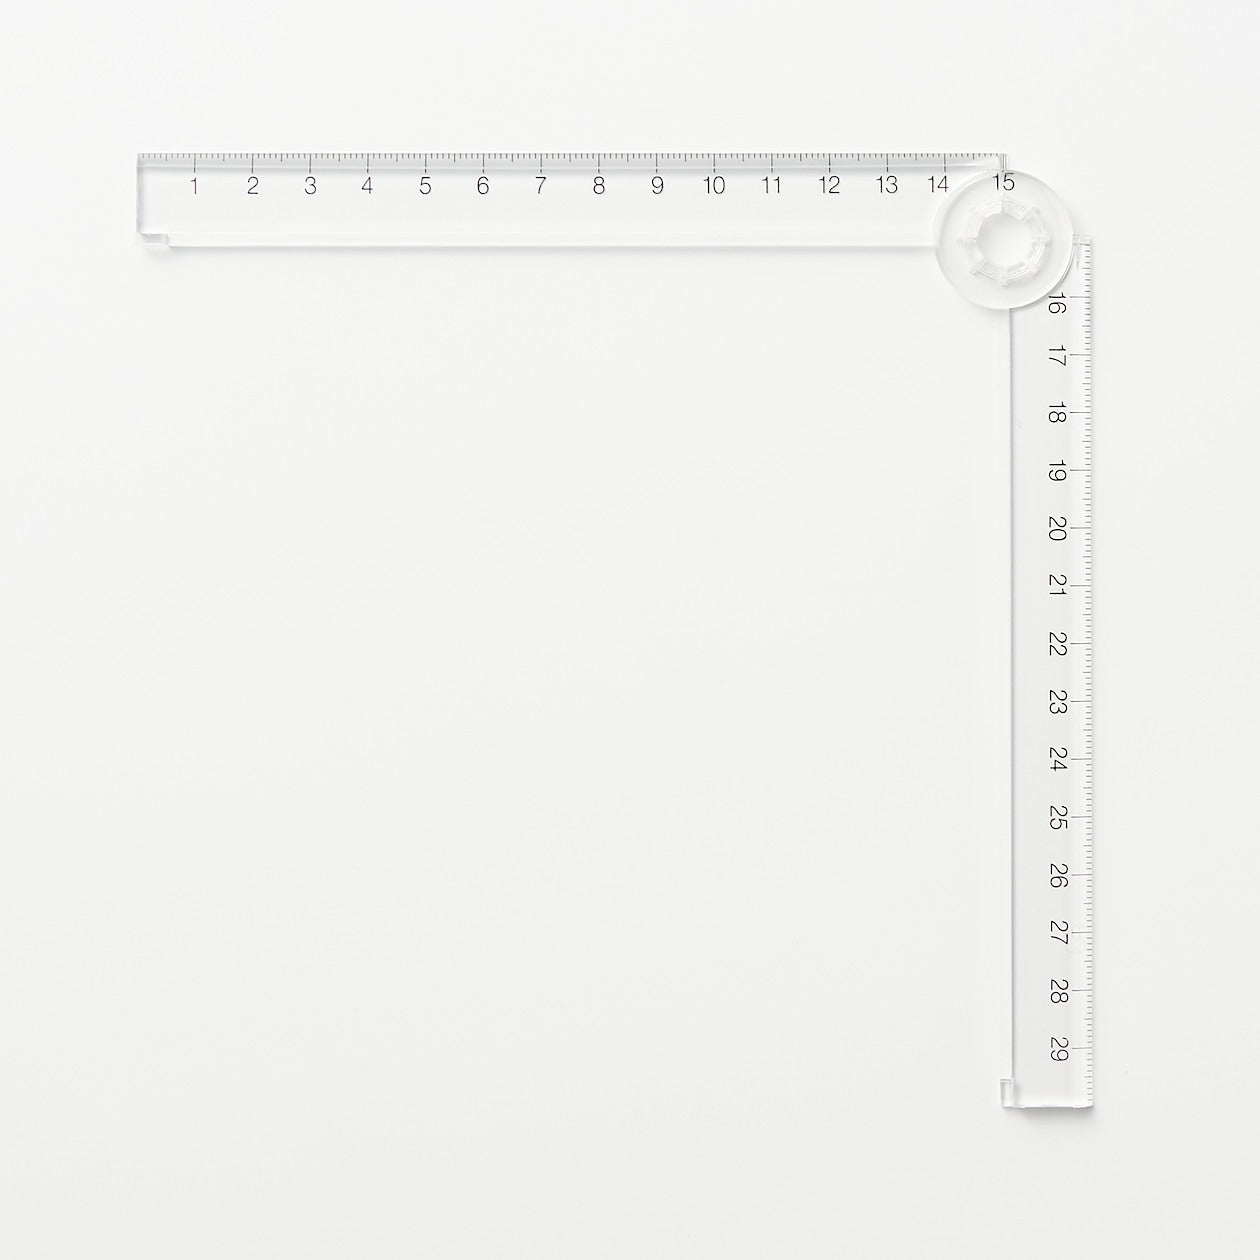 Polycarbonate Double Ruler